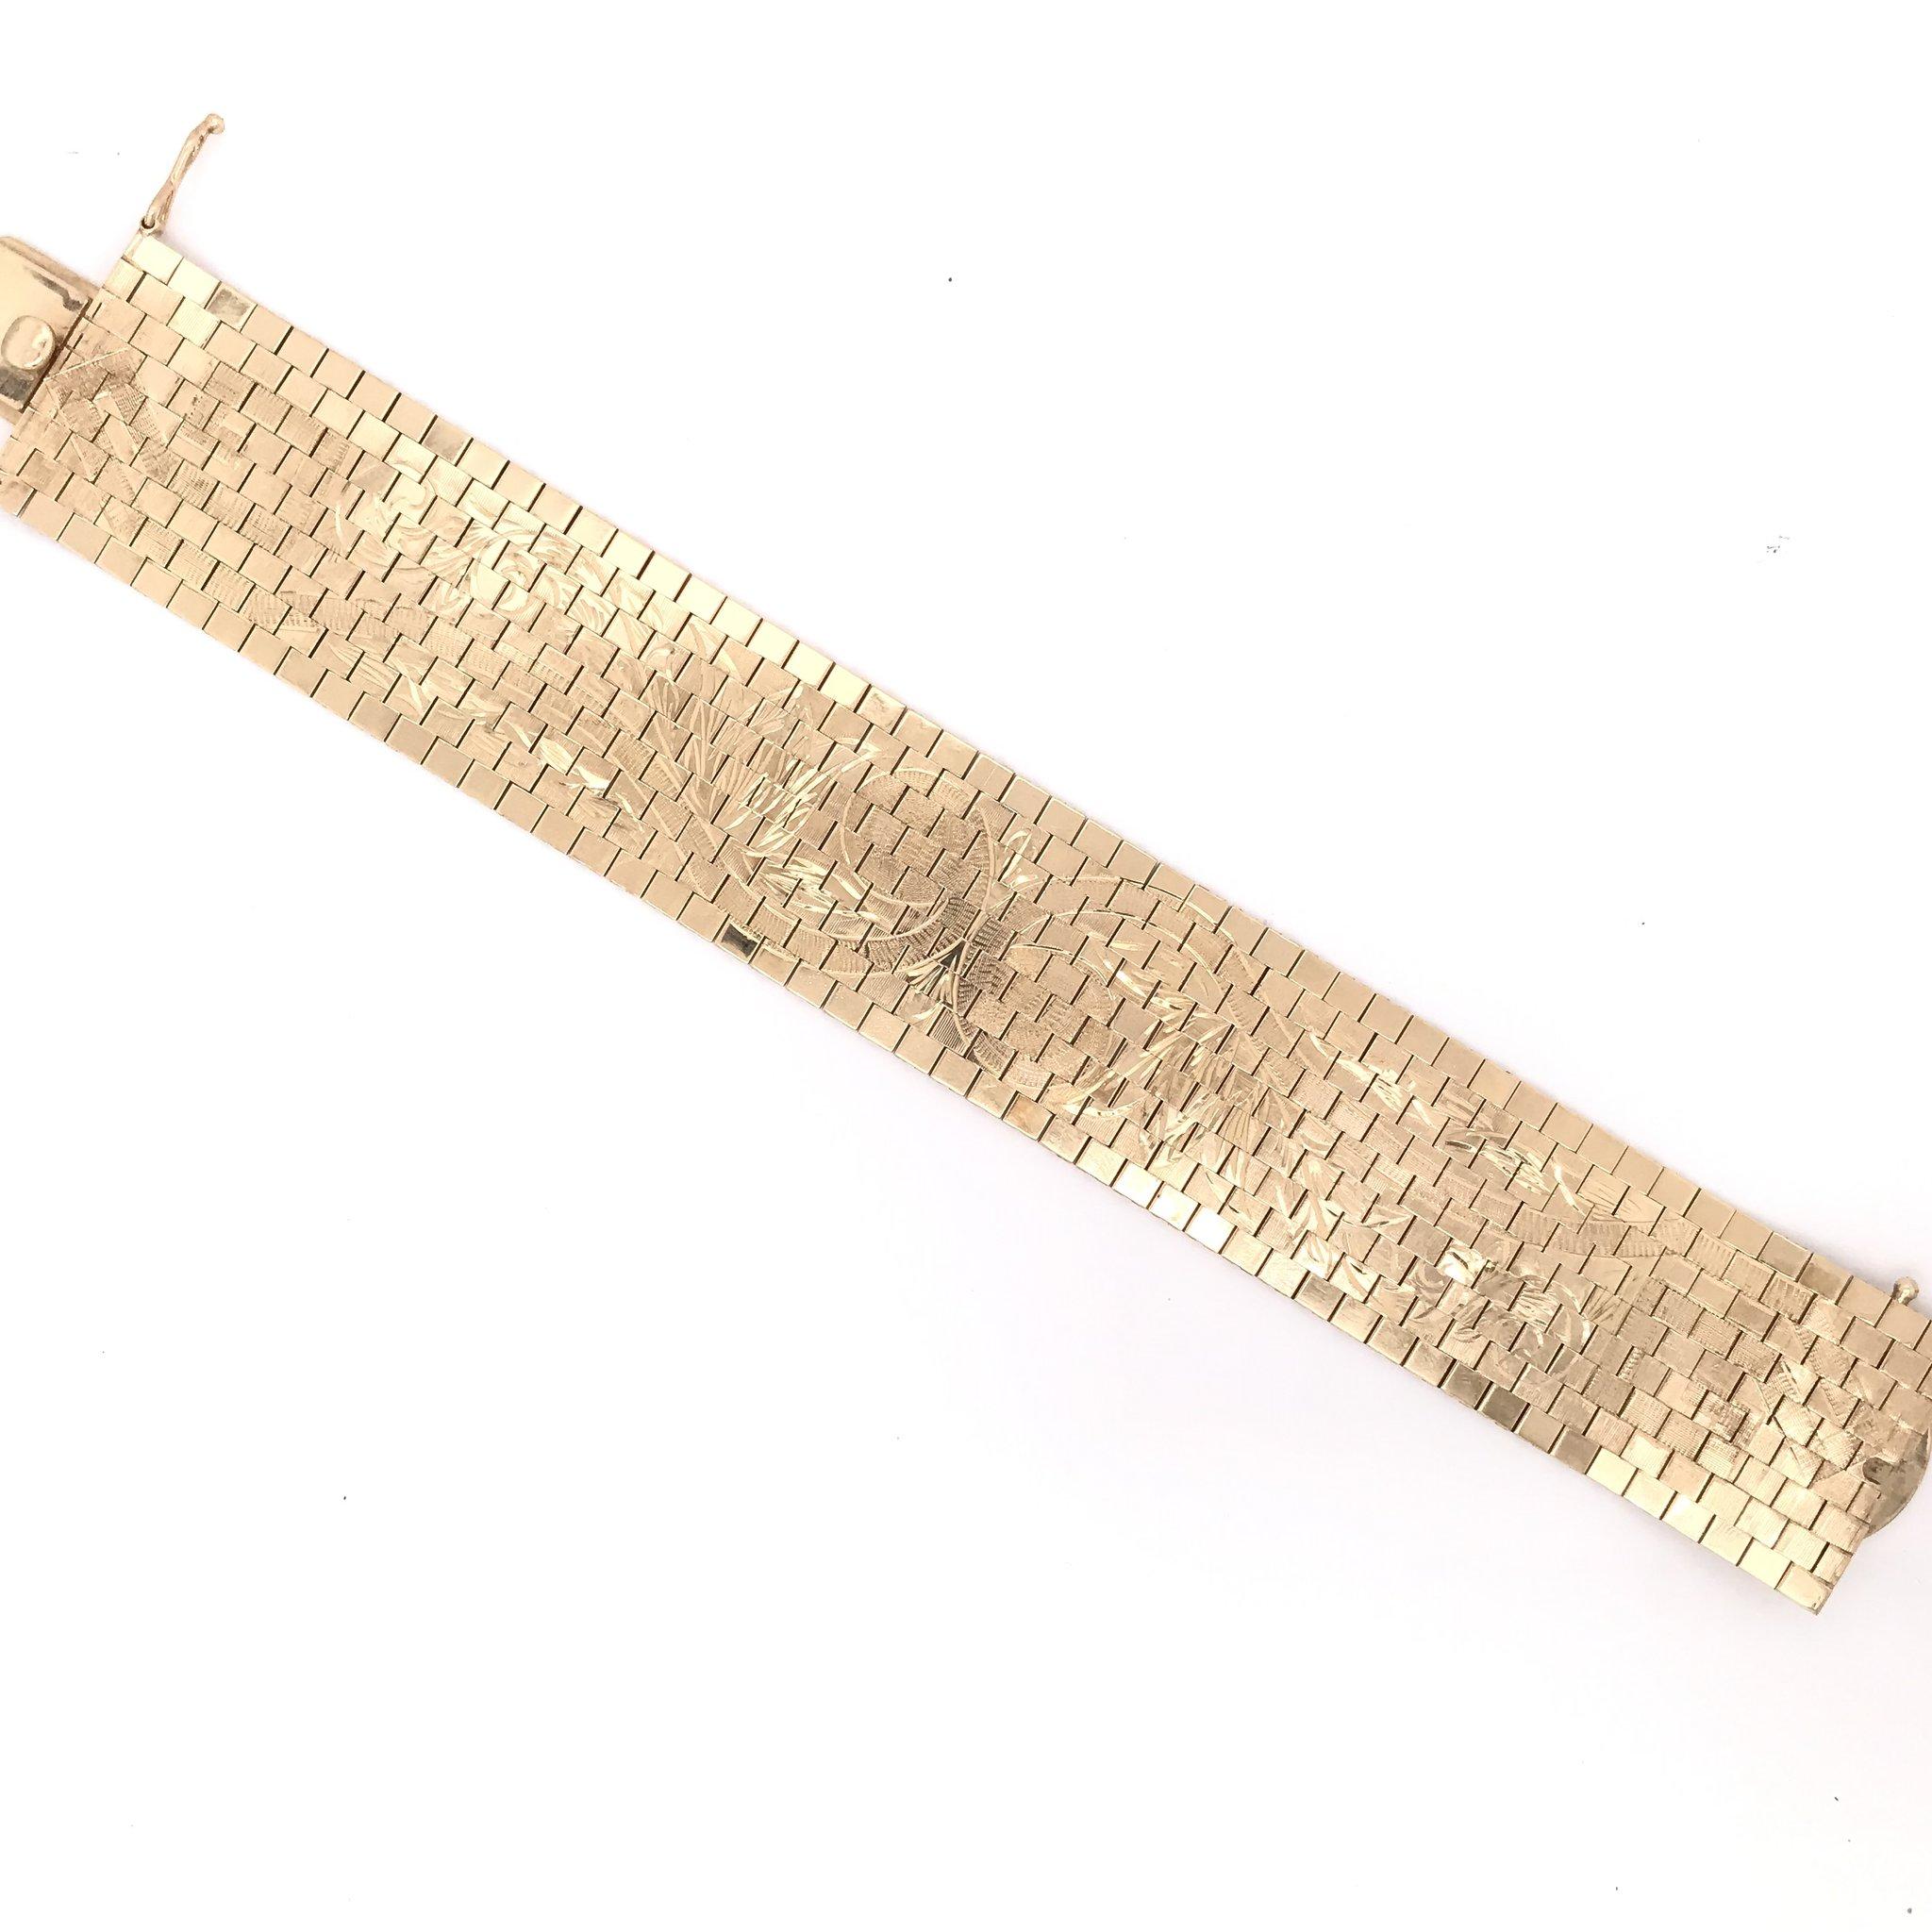 This wide gold bracelet is an estate piece. The bracelet is 14k gold and crafted in the Italian gold mesh style although it does not specify that it is Italian made. The smooth 14K gold links feature extensive floral engravings. This bracelet